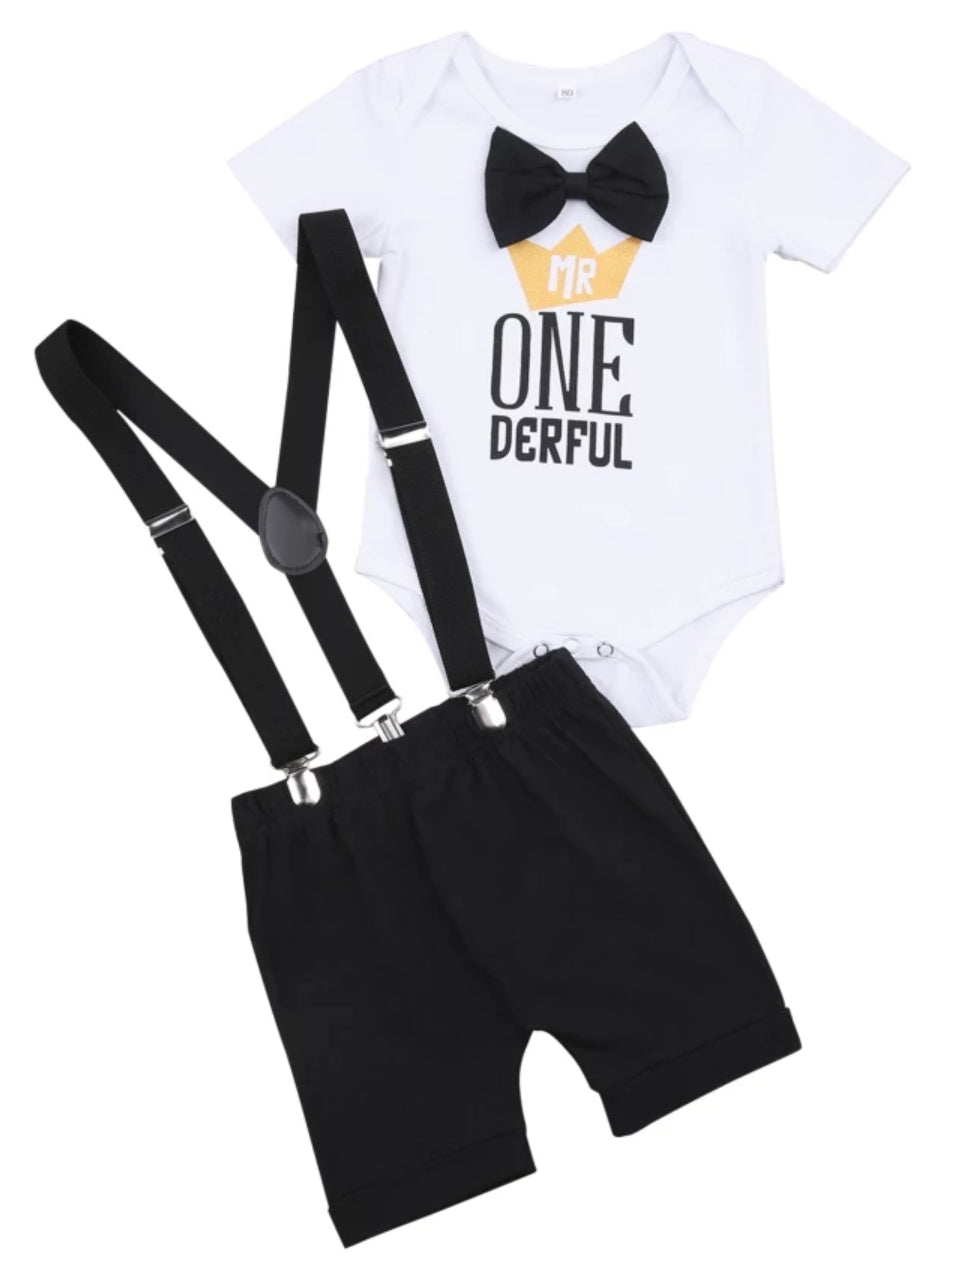 Mr ONE Derful Romper, Shorts and Suspenders 